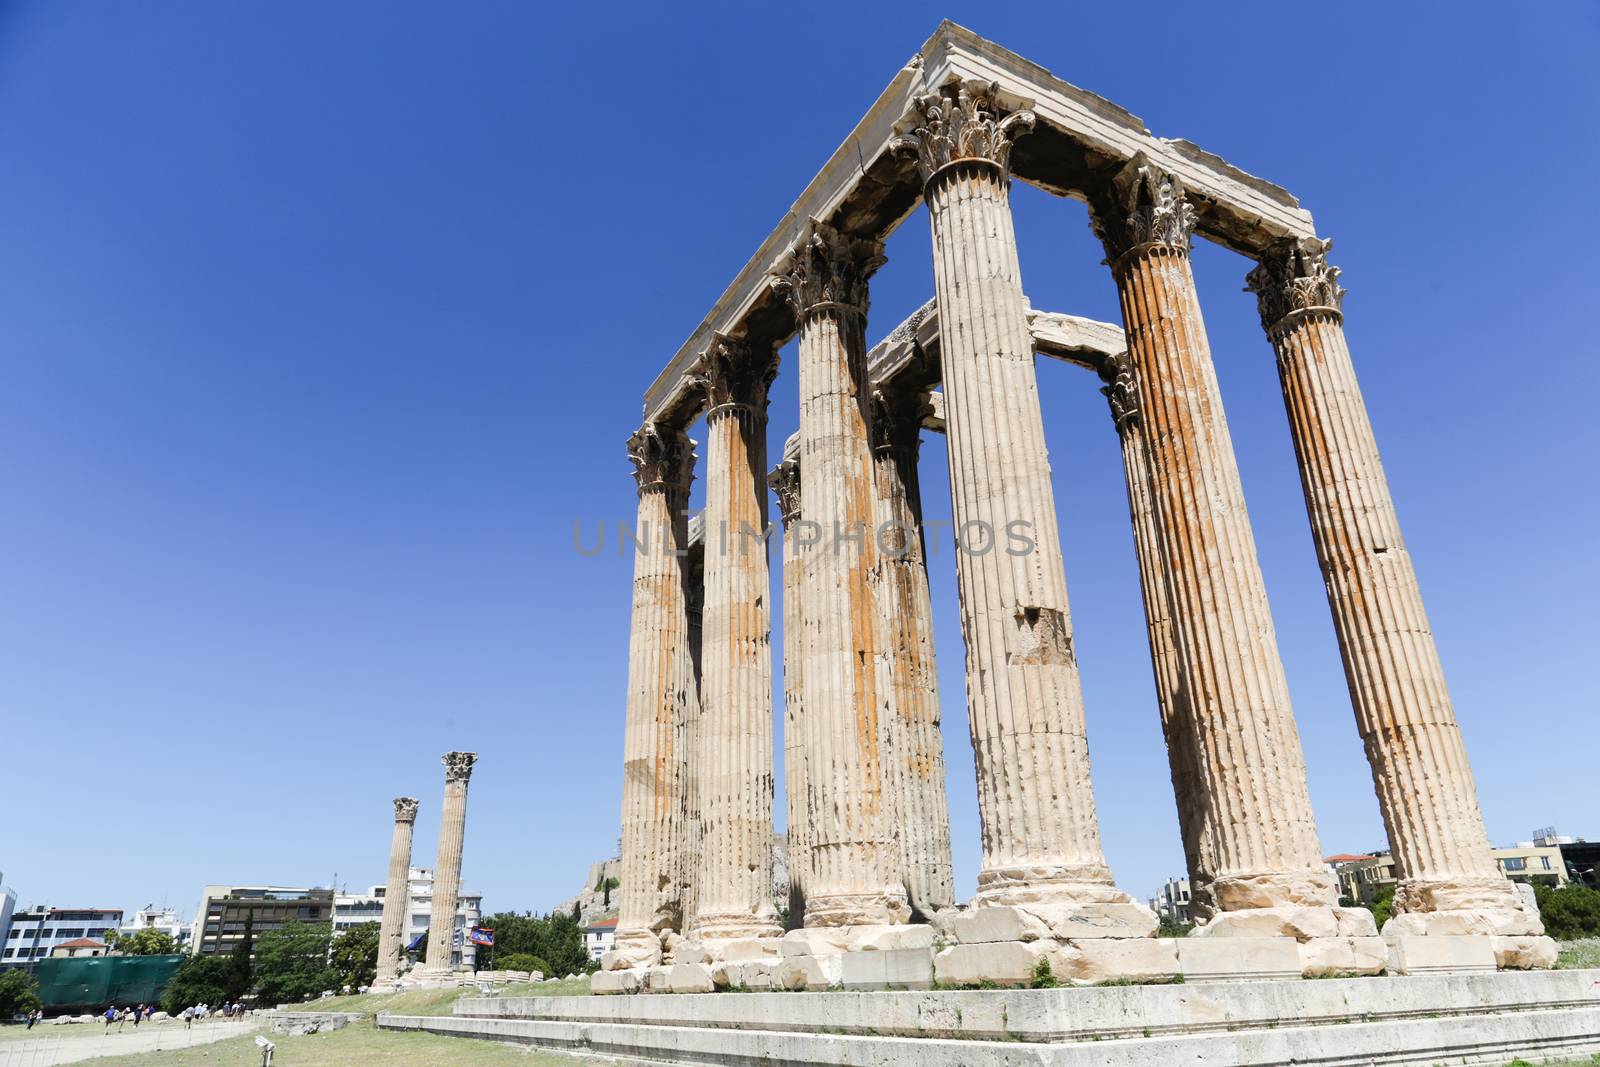 The Temple of Olympian Zeus or the Olympieion